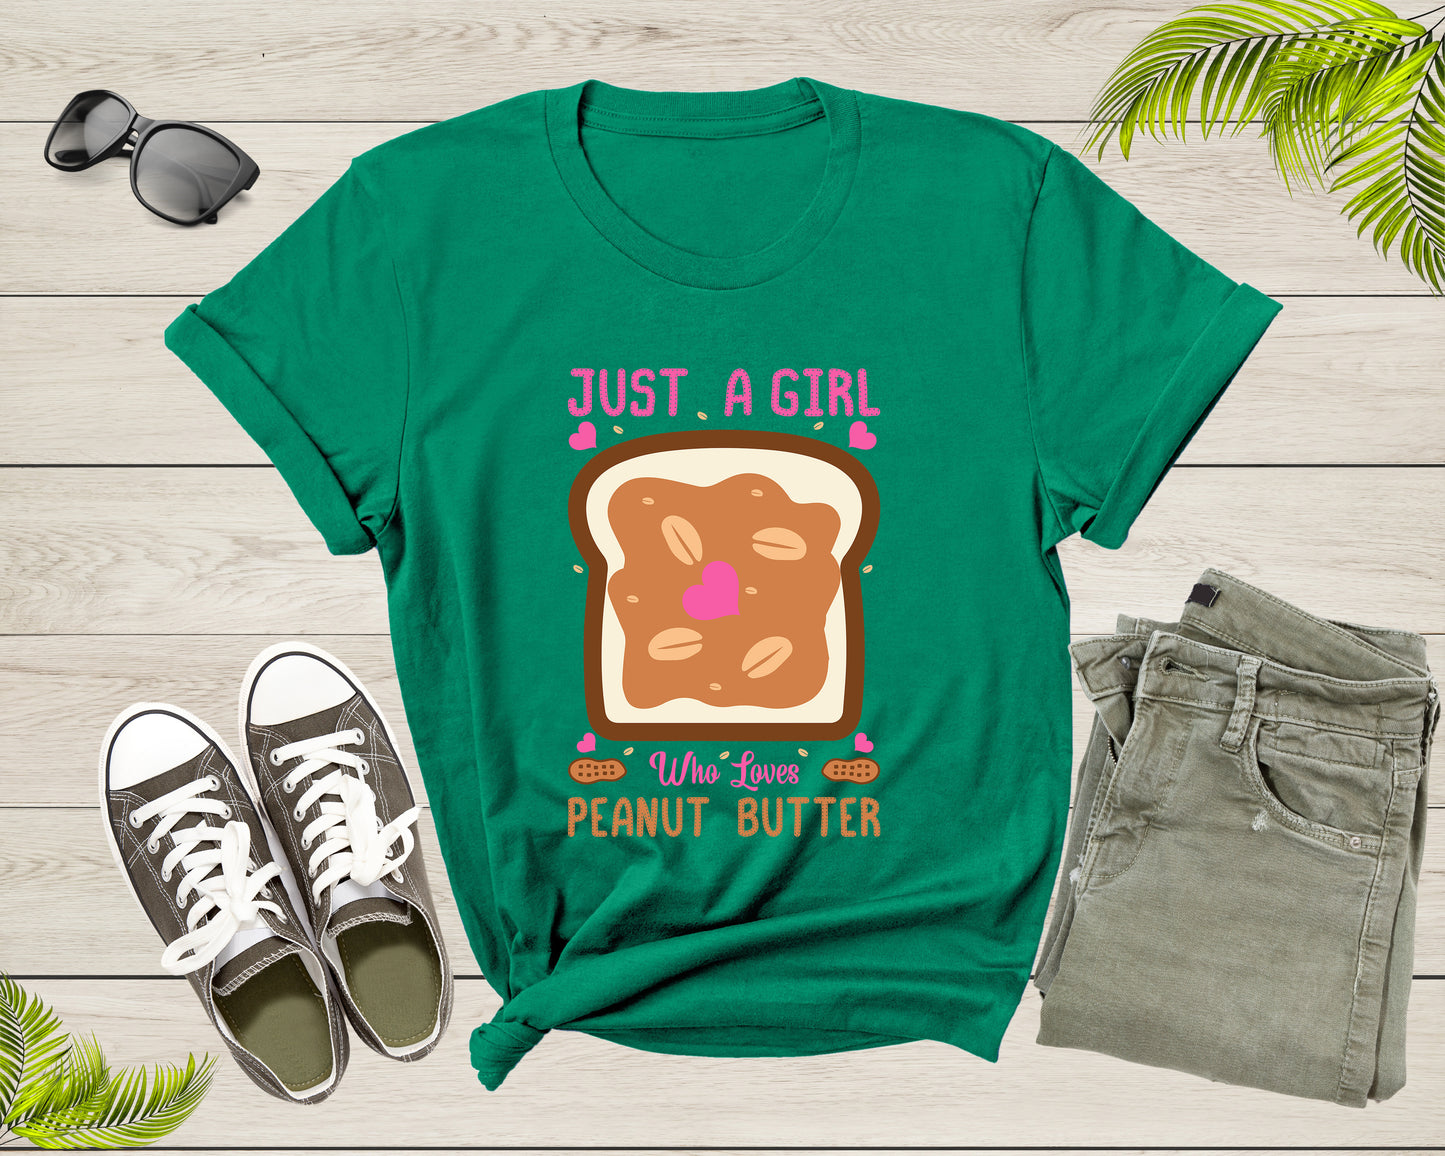 Just A Girl Who Loves Peanut Butter Funny Foodie Lover Gift T-shirt Peanut Butter Jelly Shirt Peanut Butter Lover Tshirt Food Shirt